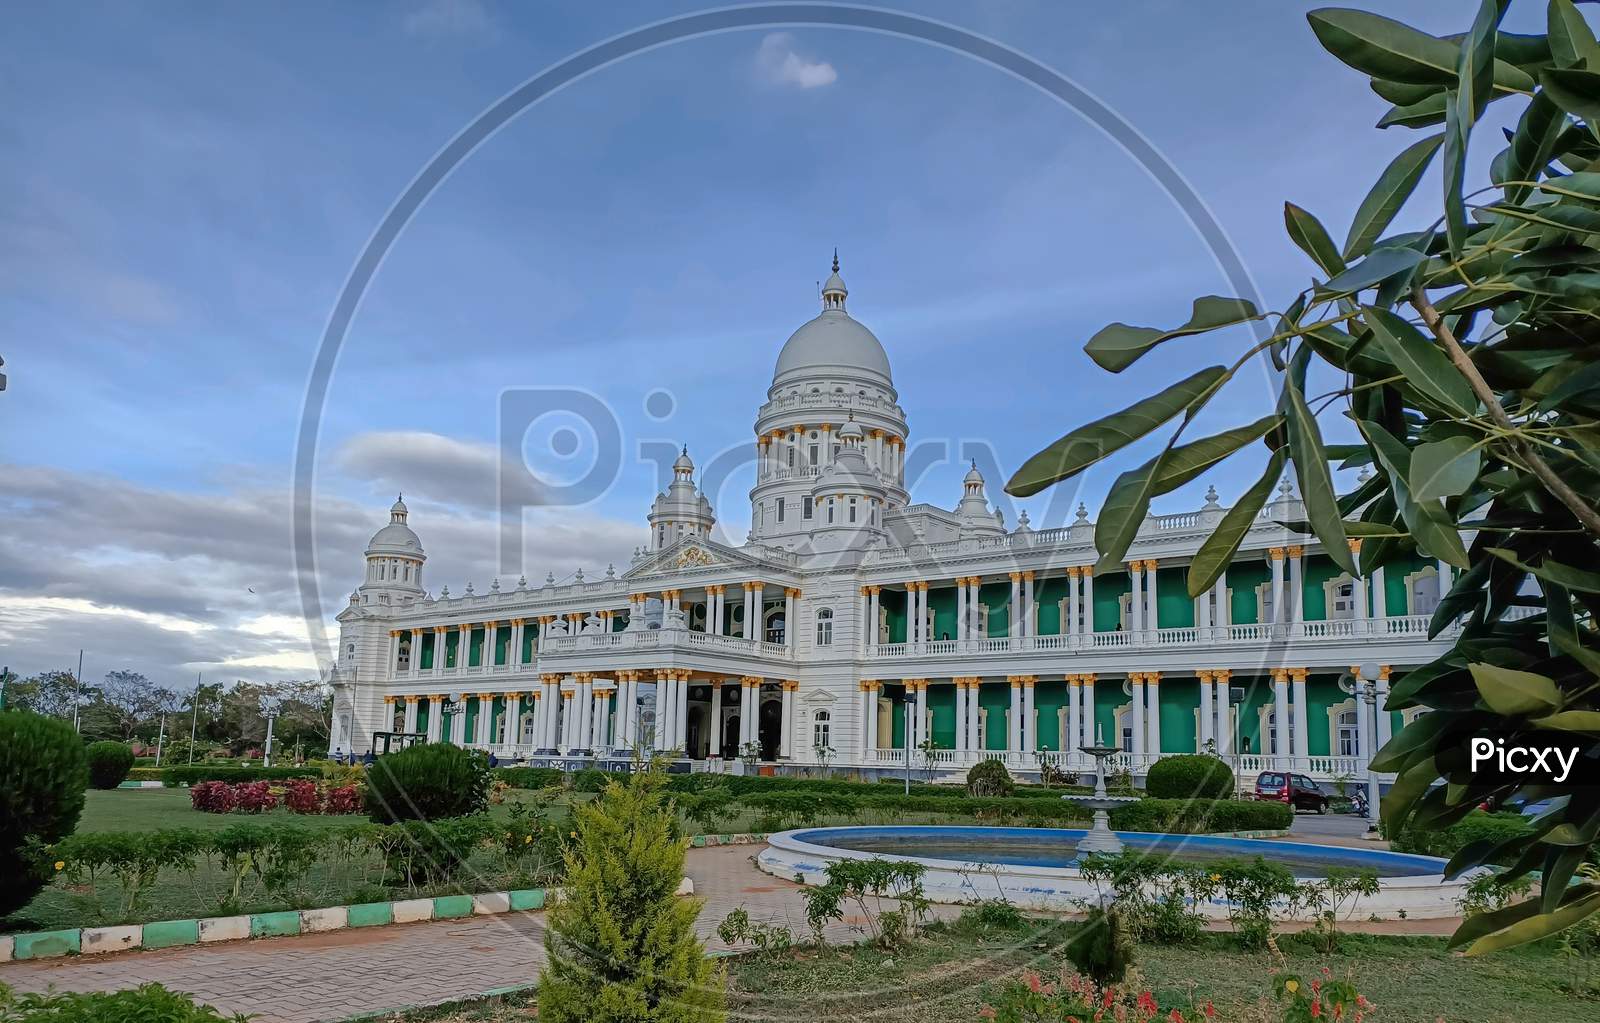 A Dramatic view of the Magnificent Lalitha Mahal Summer Palace in white color against the blue sky and the landscape at Mysuru,India.